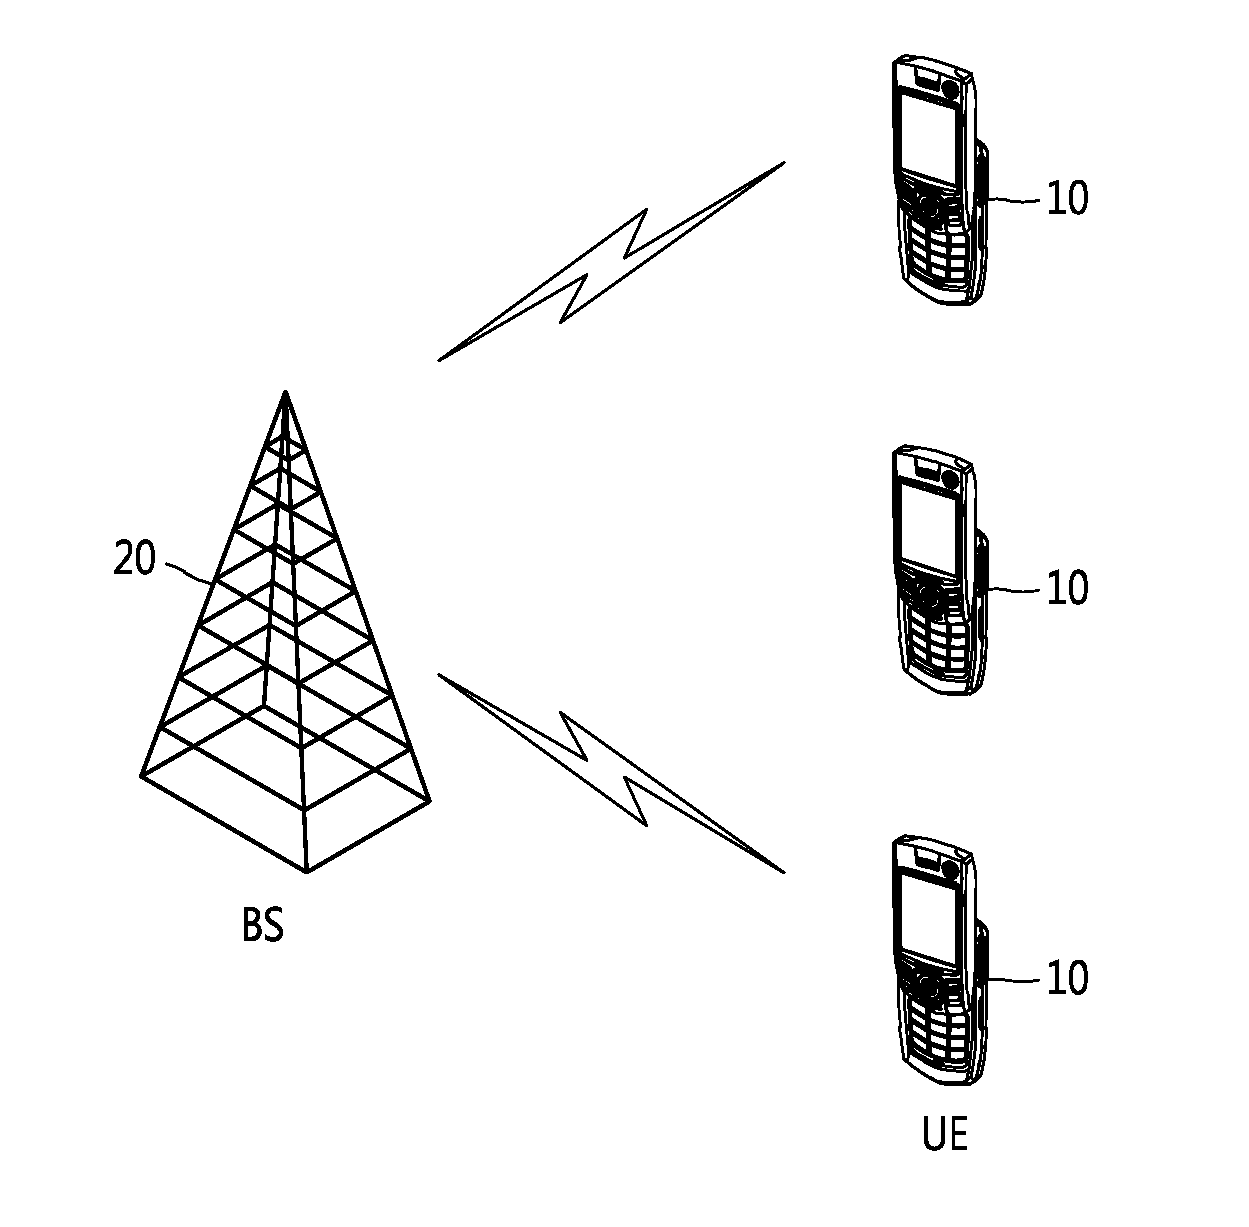 Method and apparatus for allocating device identifiers (STID) in a wireless access system